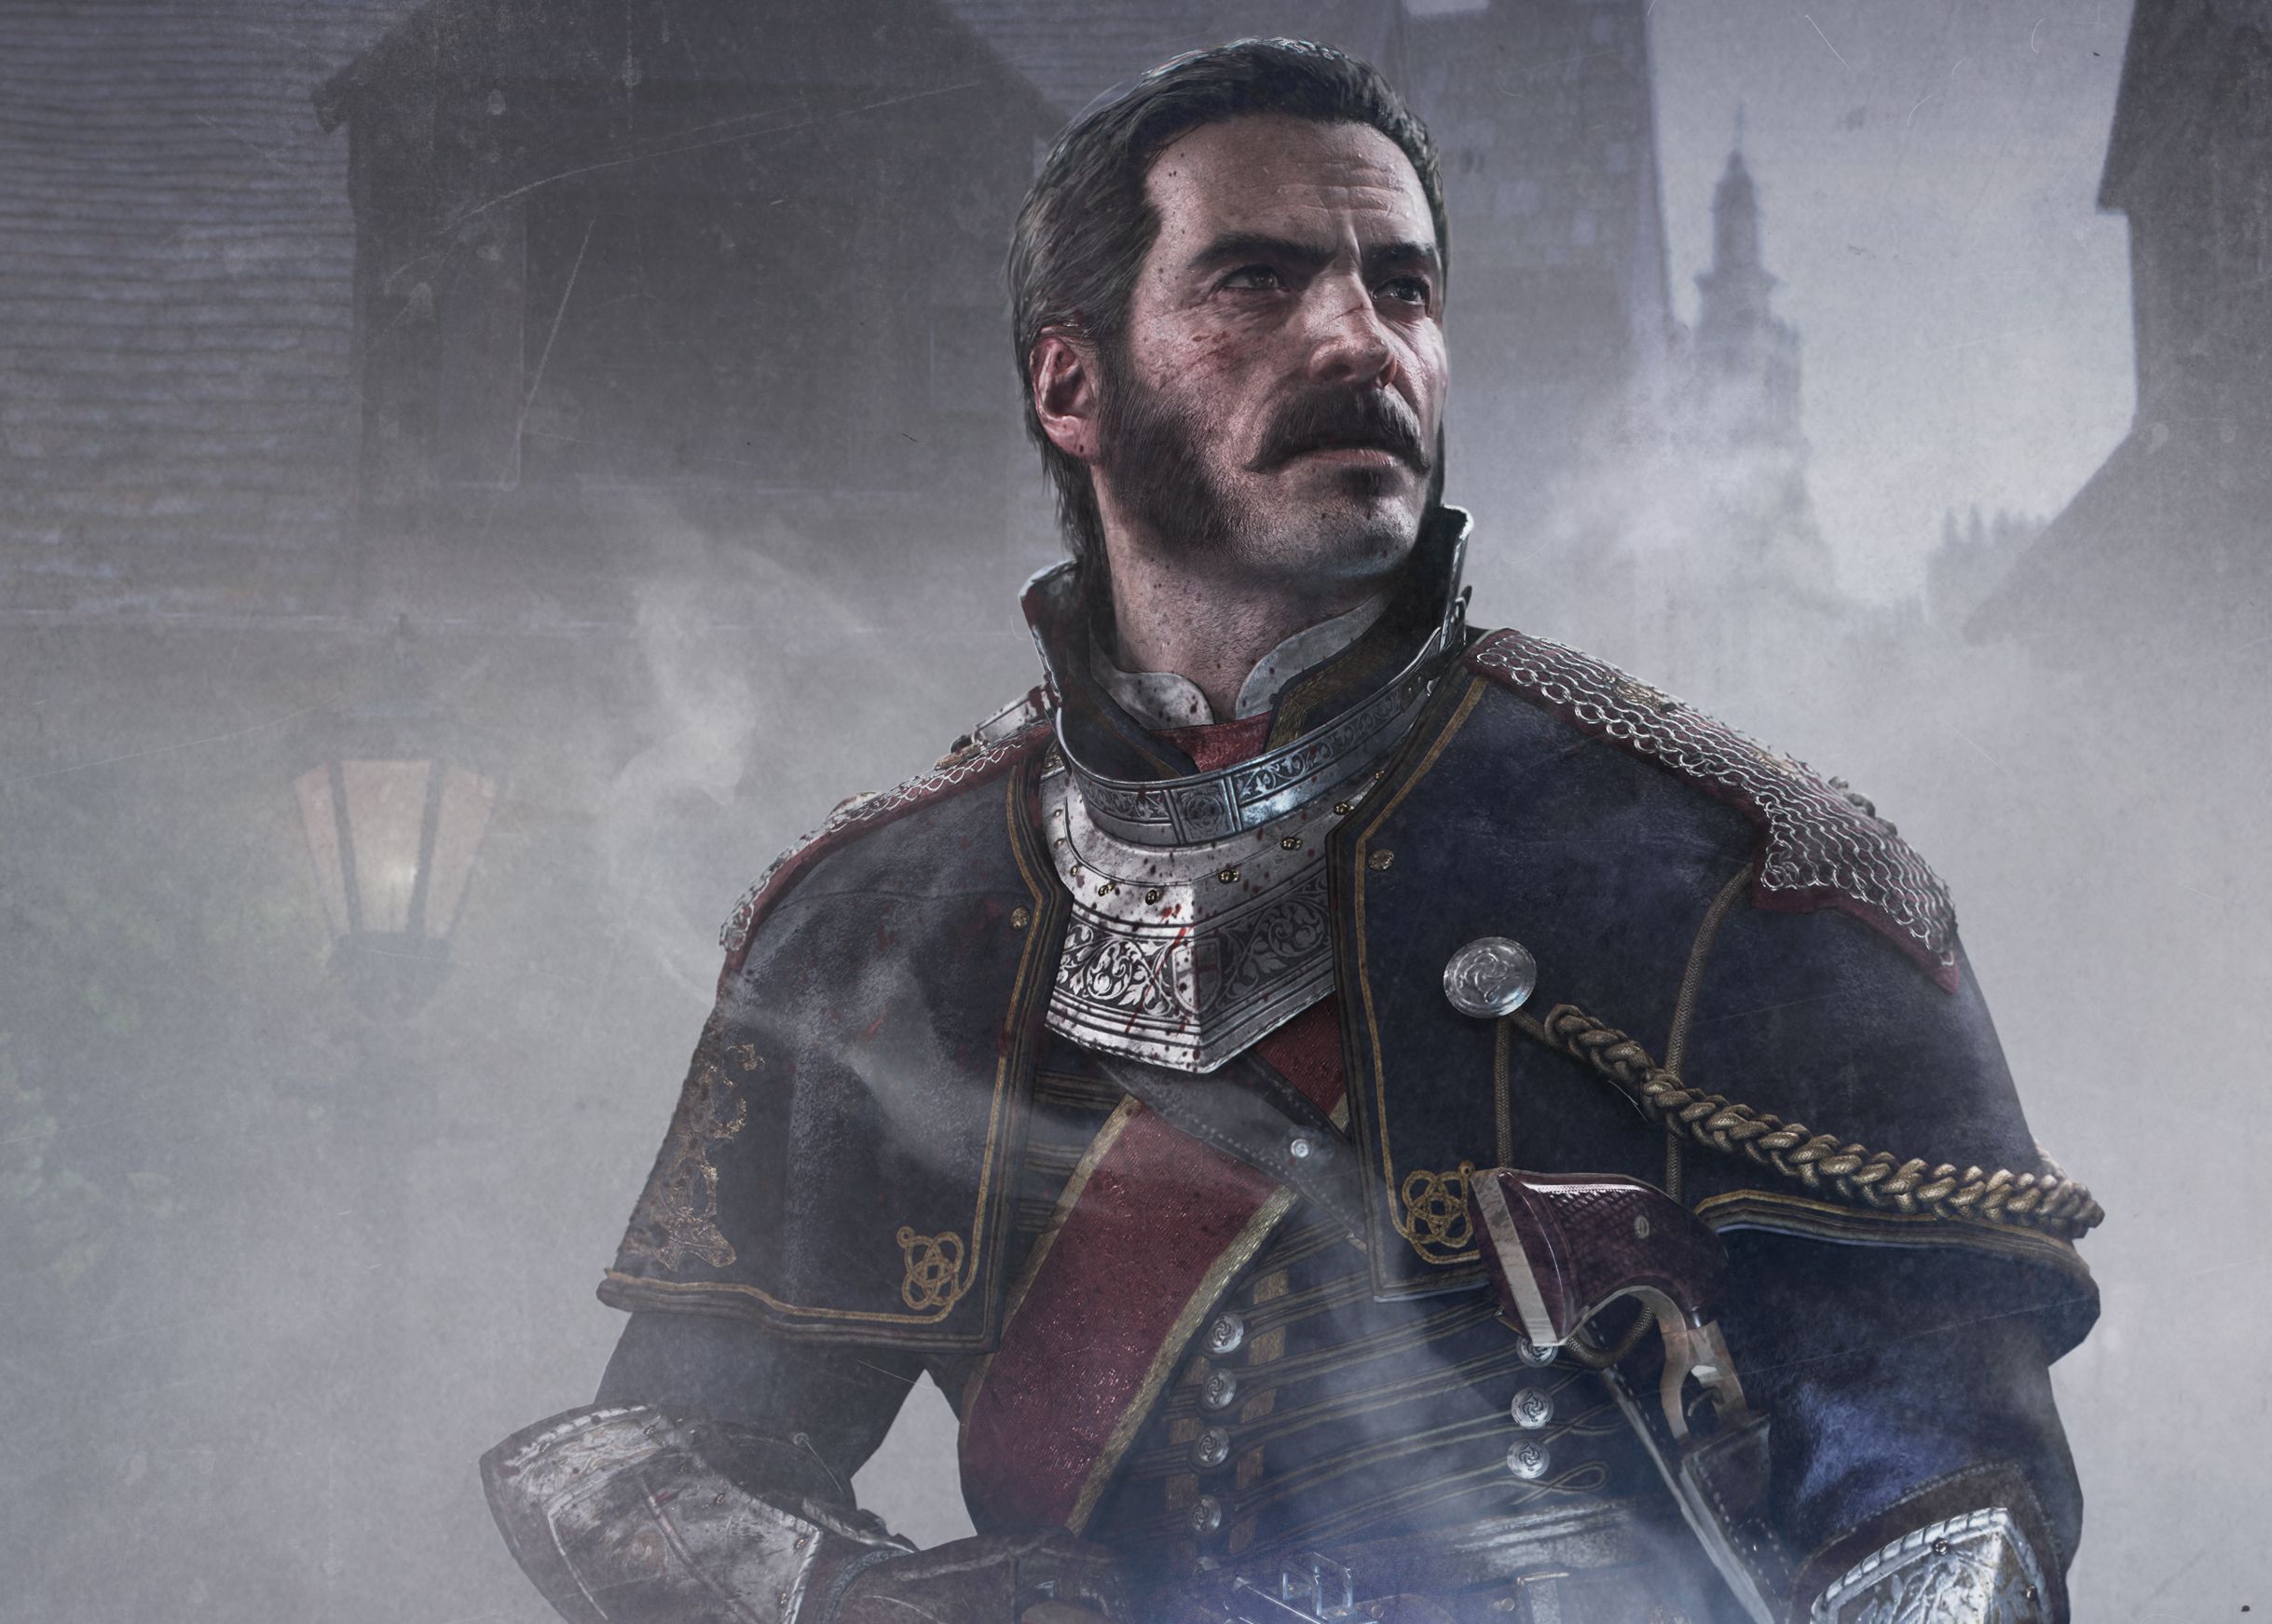 the new order 1886